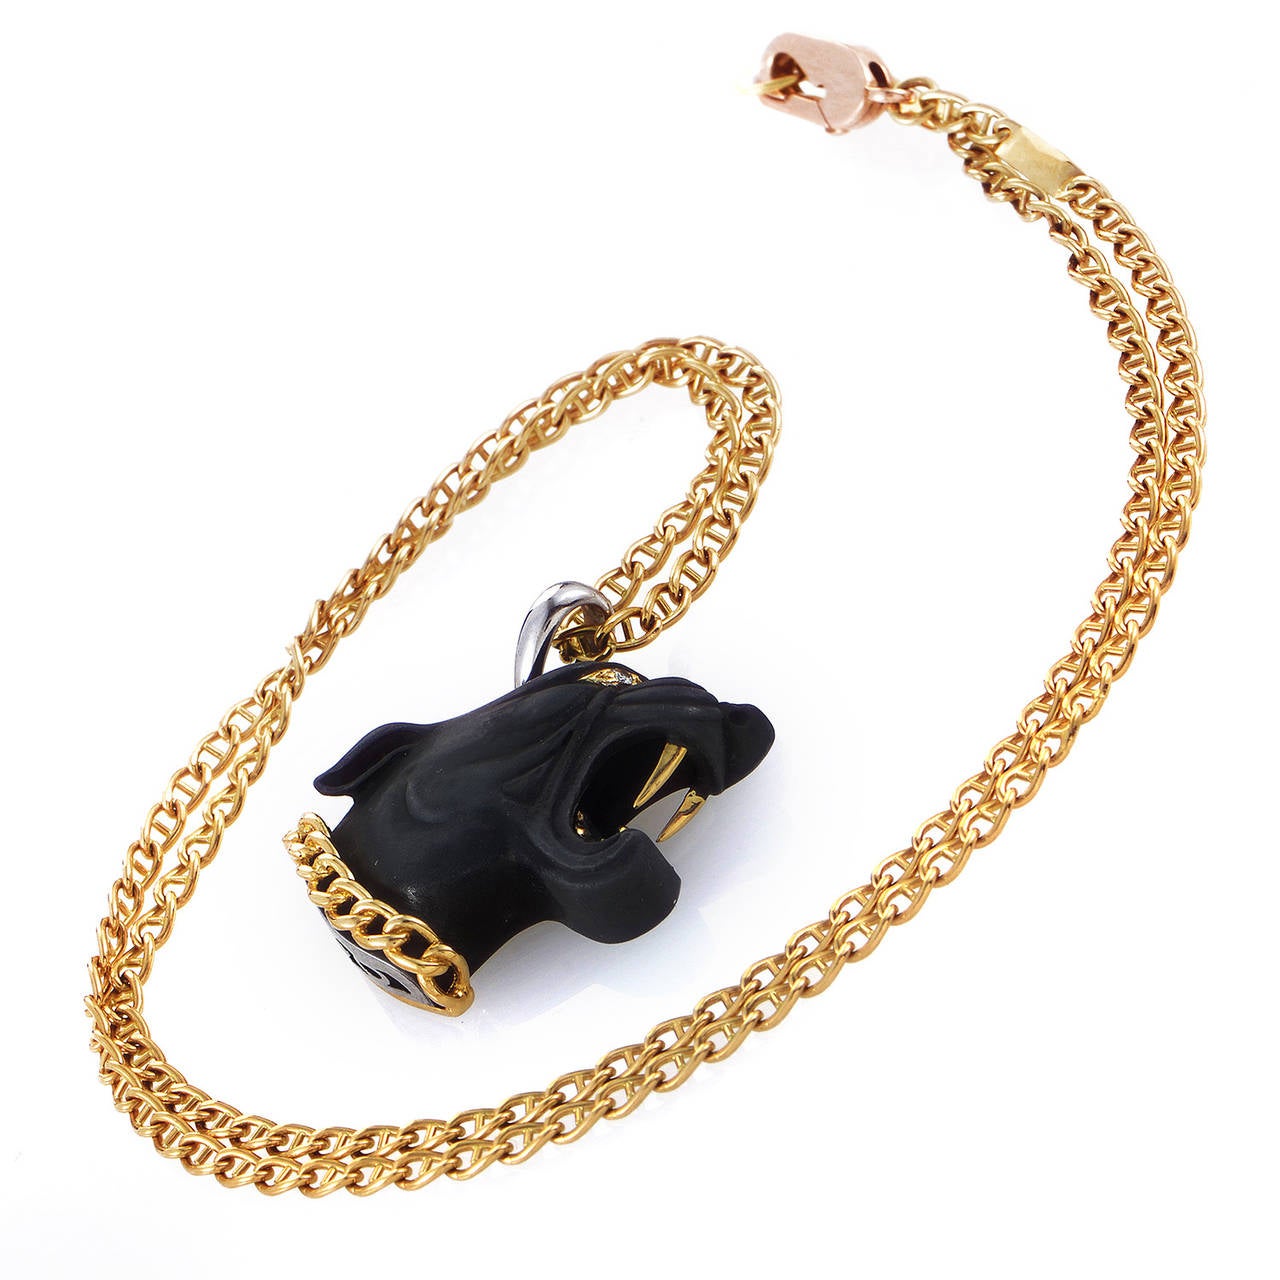 Brilliantly contrasting the delightful blend of 18K yellow and white gold, the matt black panther head pendant of this magnificent necklace from Carrera y Carrera boasts two delicate diamonds as eyes, while its collar and fangs shine with that